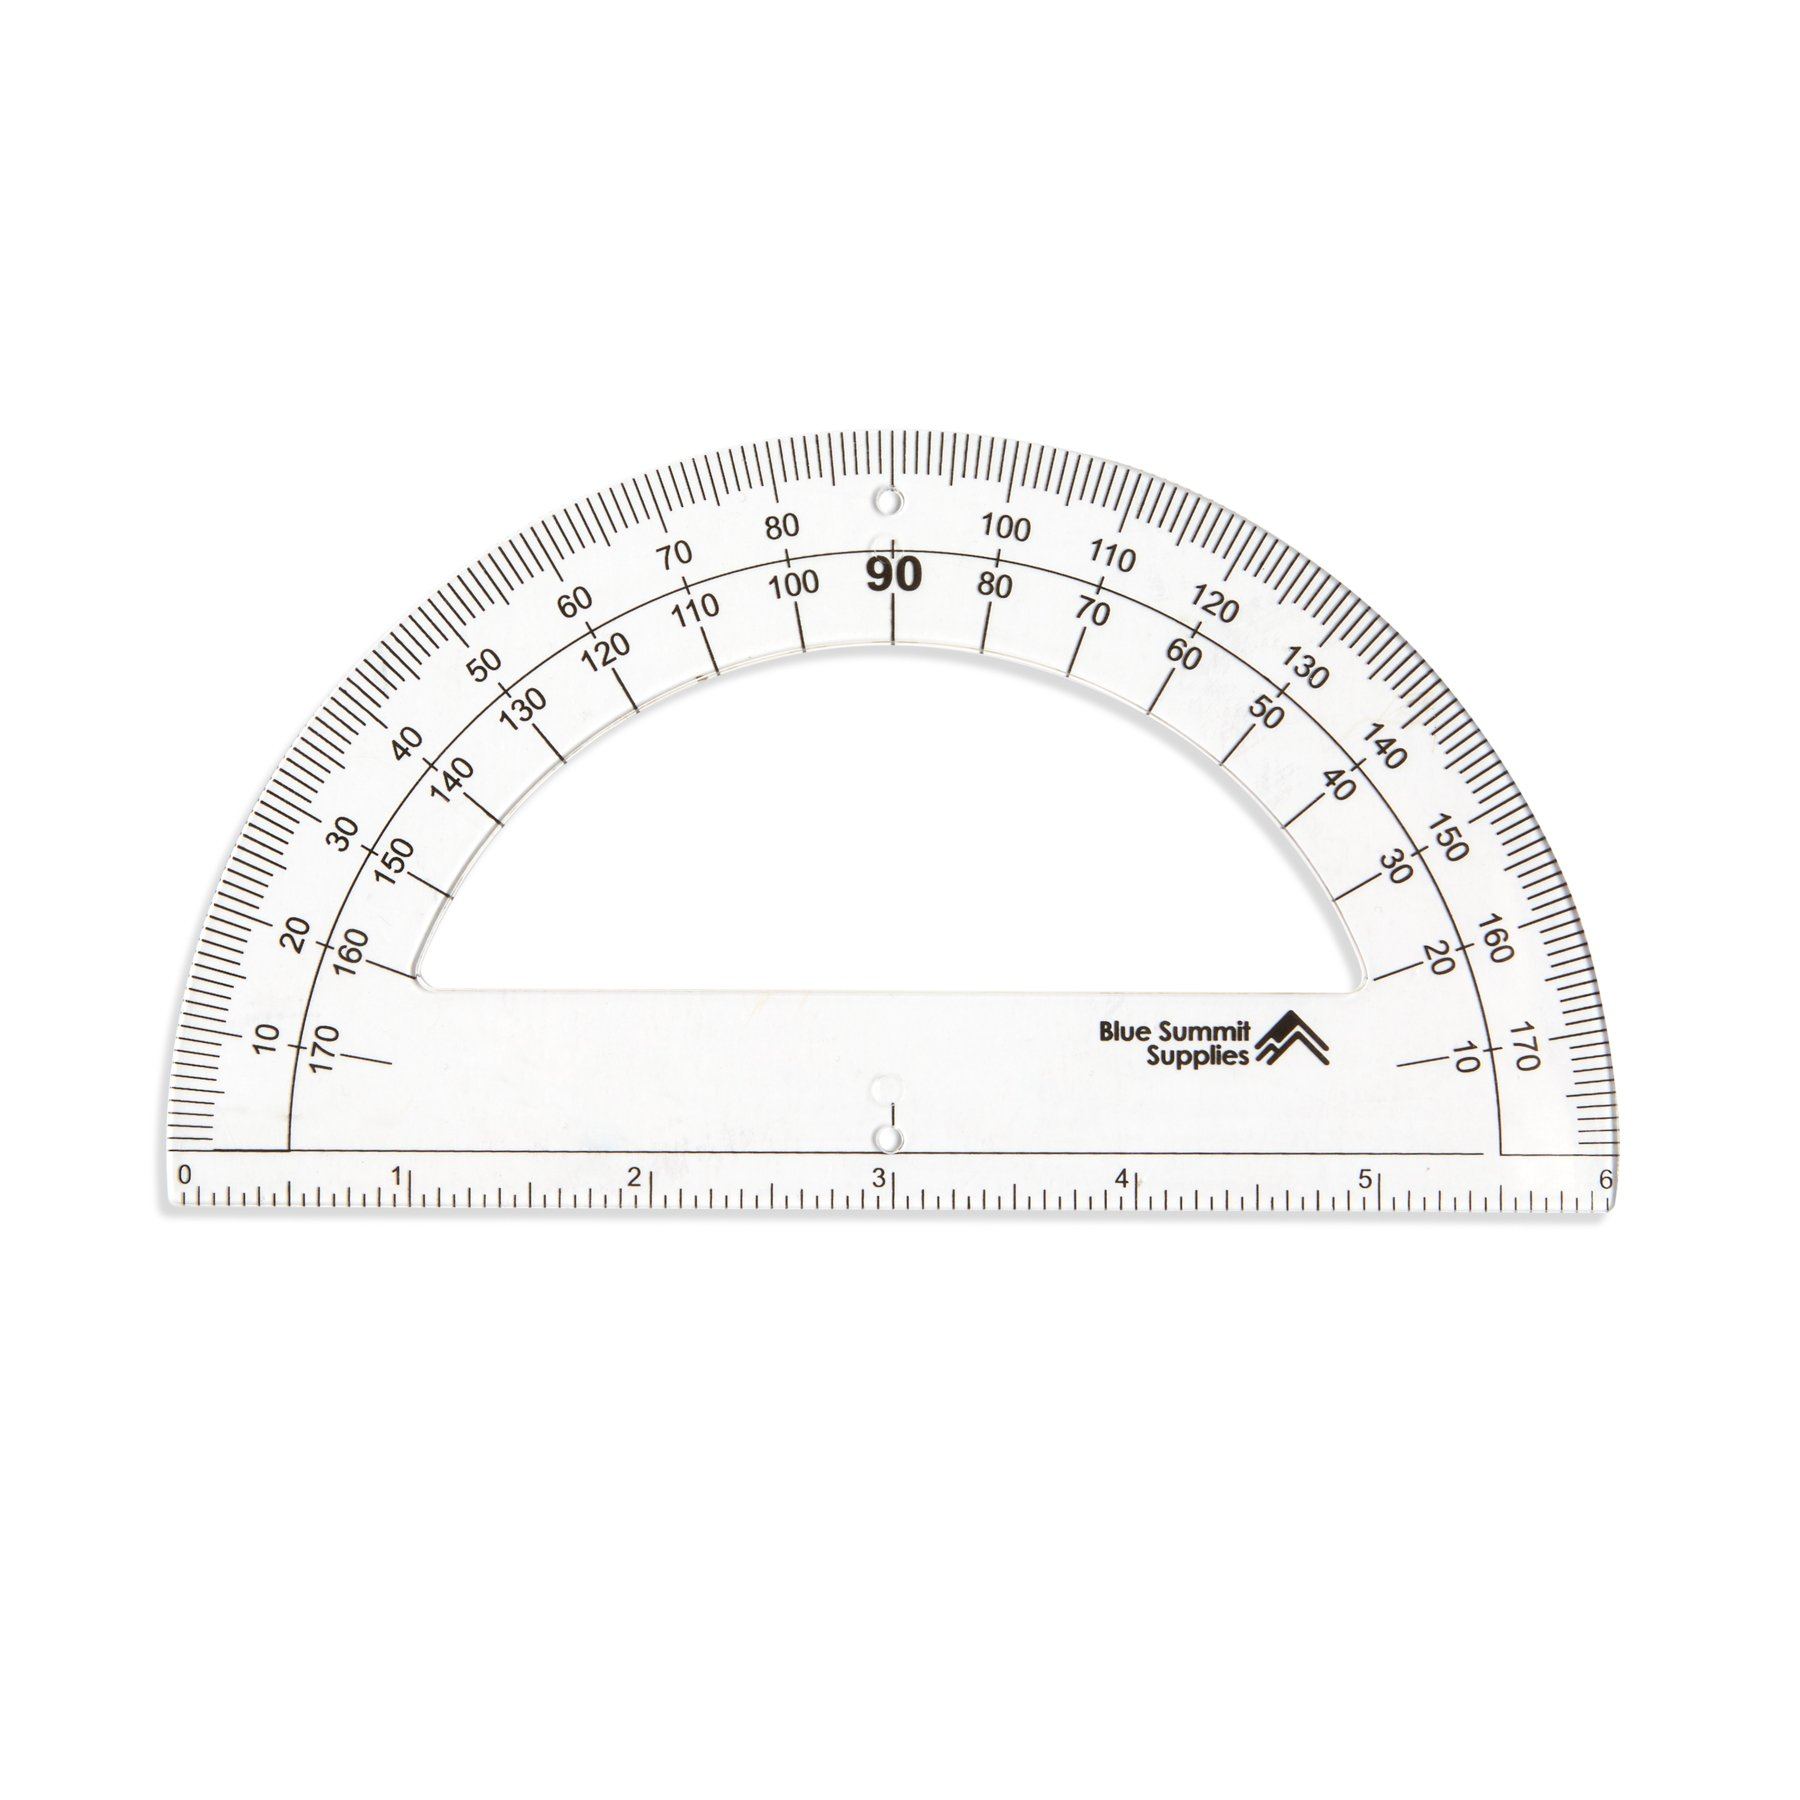 protractor actual size when printed